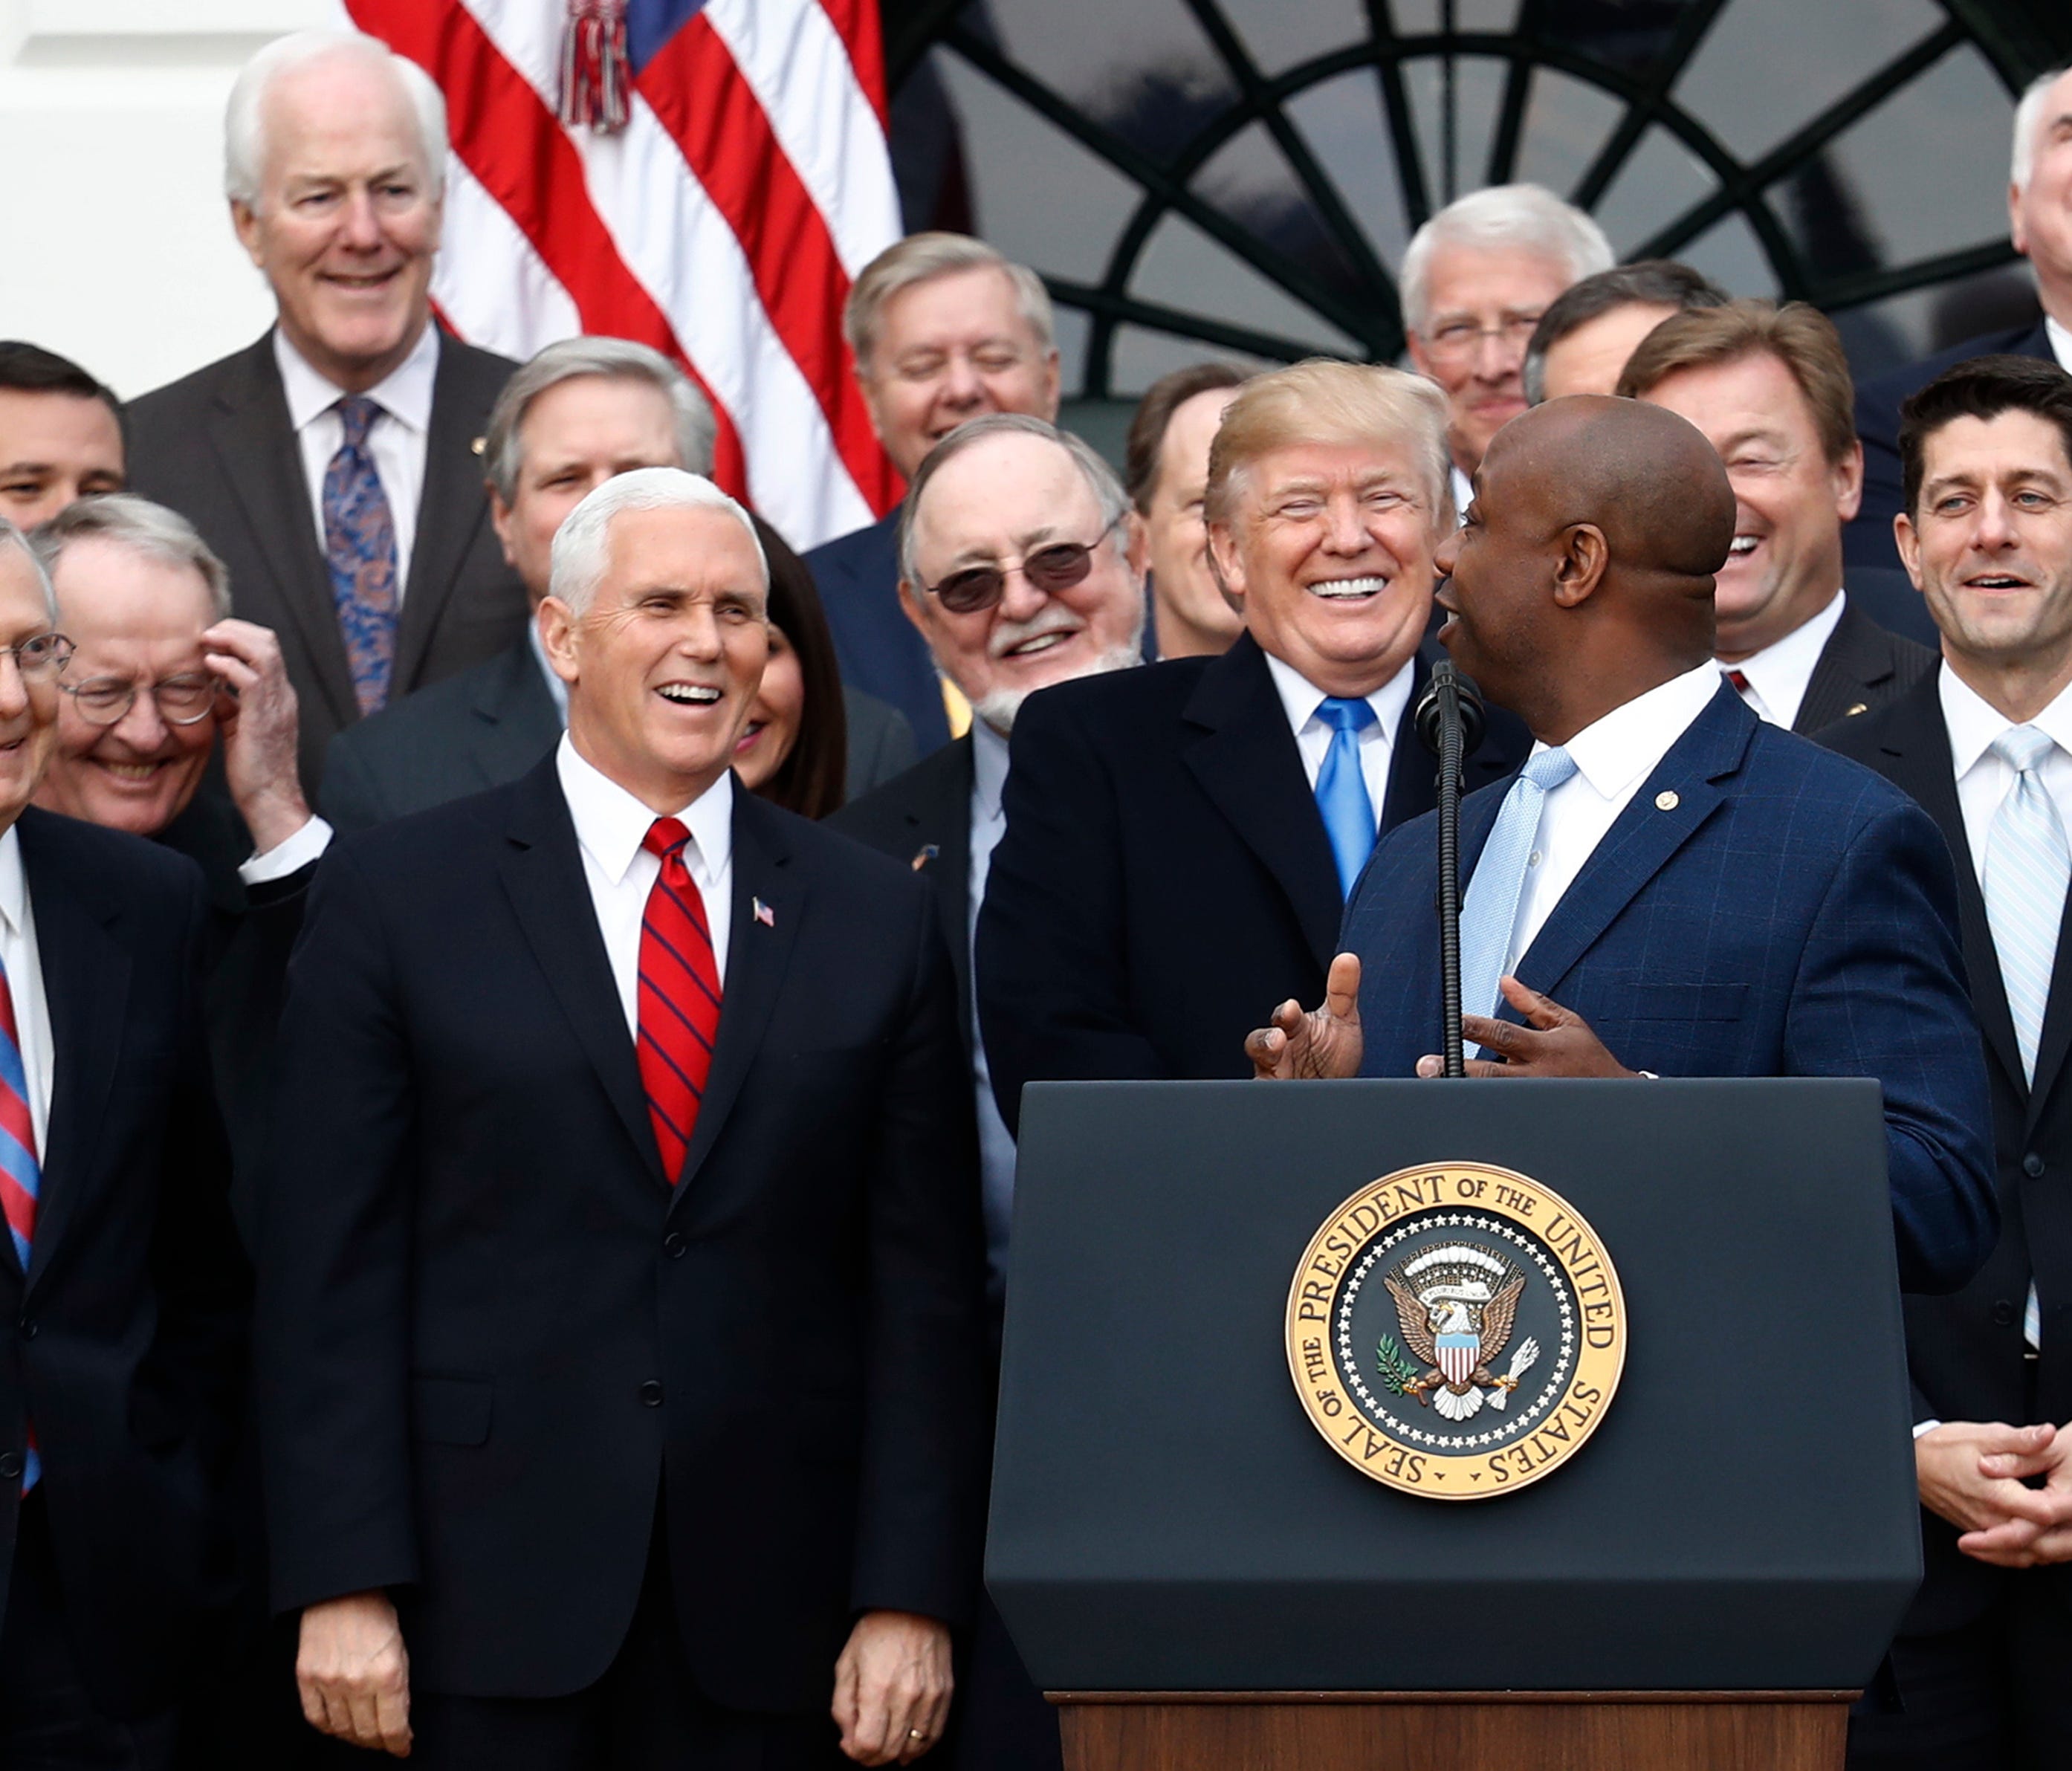 President Donald Trump smiles  with Senate Majority leader Mitch mcConnell of Ky., Vice President Mike Pence and House Speaker Paul Ryan of Wis., as Sen. Tim Scott, R-S.C., speaks during a bill passage event on the South Lawn of the White House in Wa